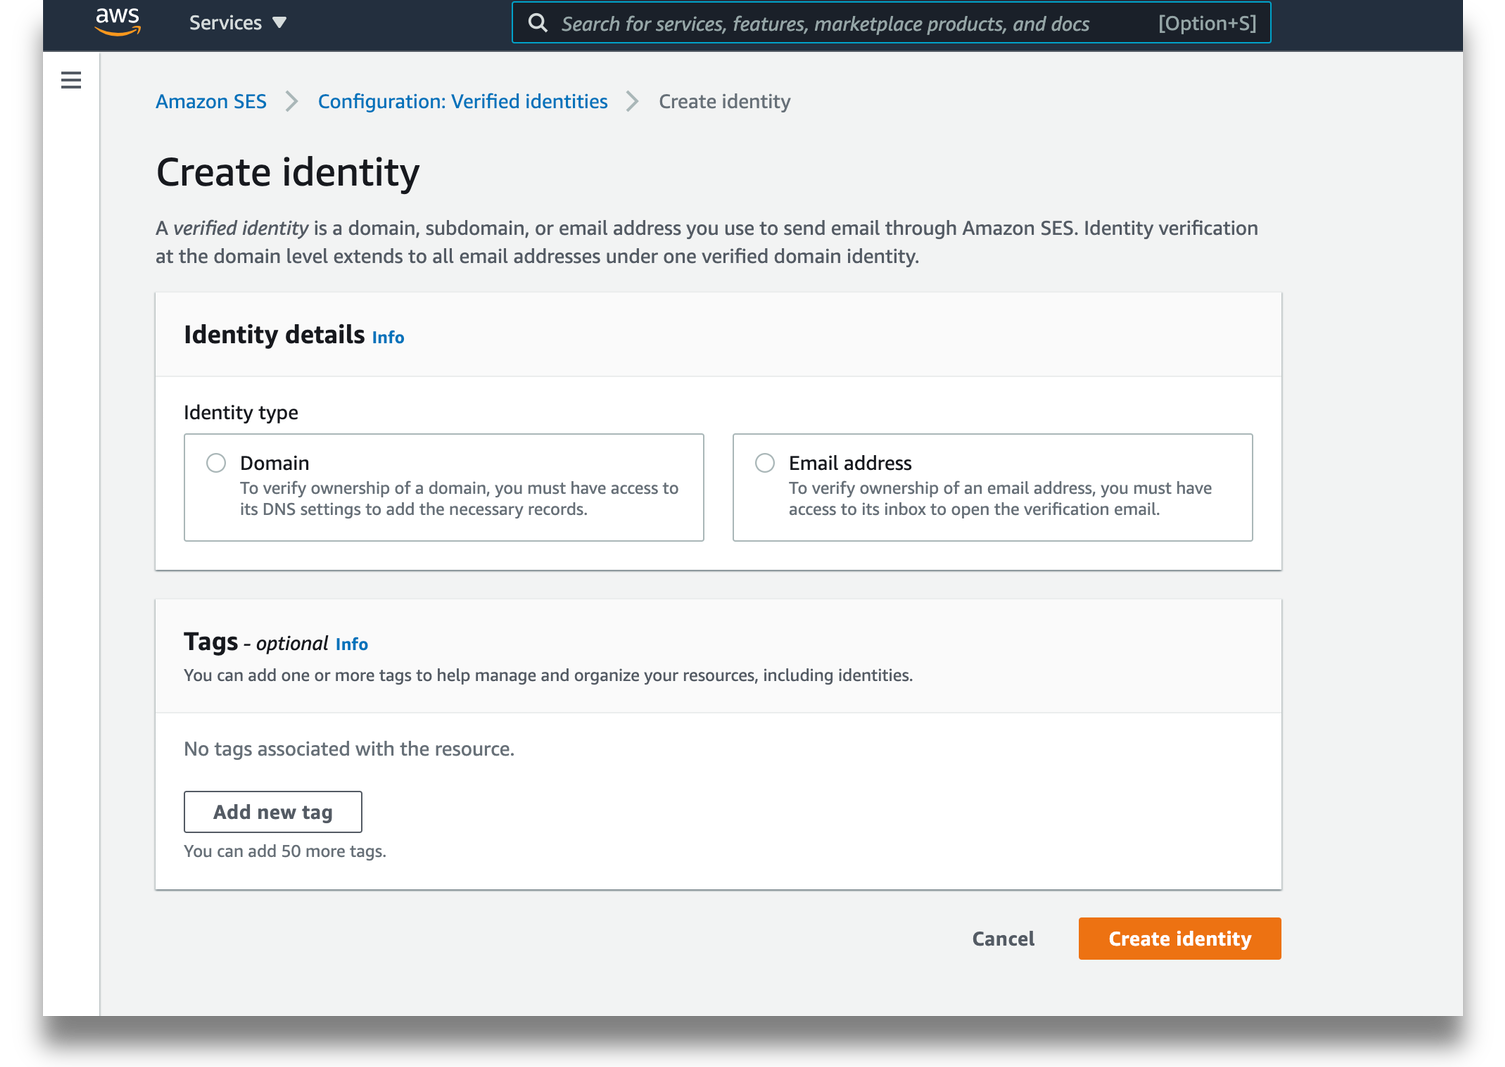 AWS SES create identify page